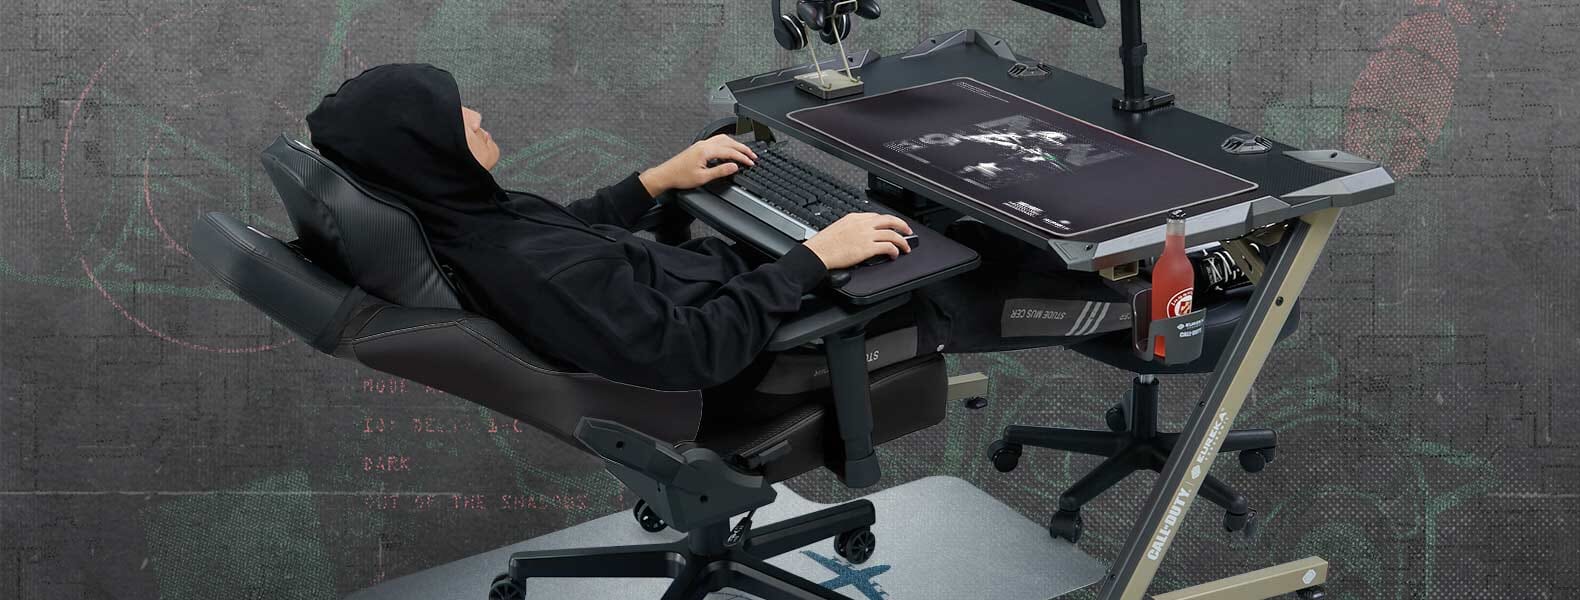 GAMING DESK: UAV RGB With Accessory Hook - Gaming Room WIth Green Gaming Chair - Gamer Fully Reclined - Dual Monitors - EUREKA ERGONOMIC GAMING-DESKS SCENE9